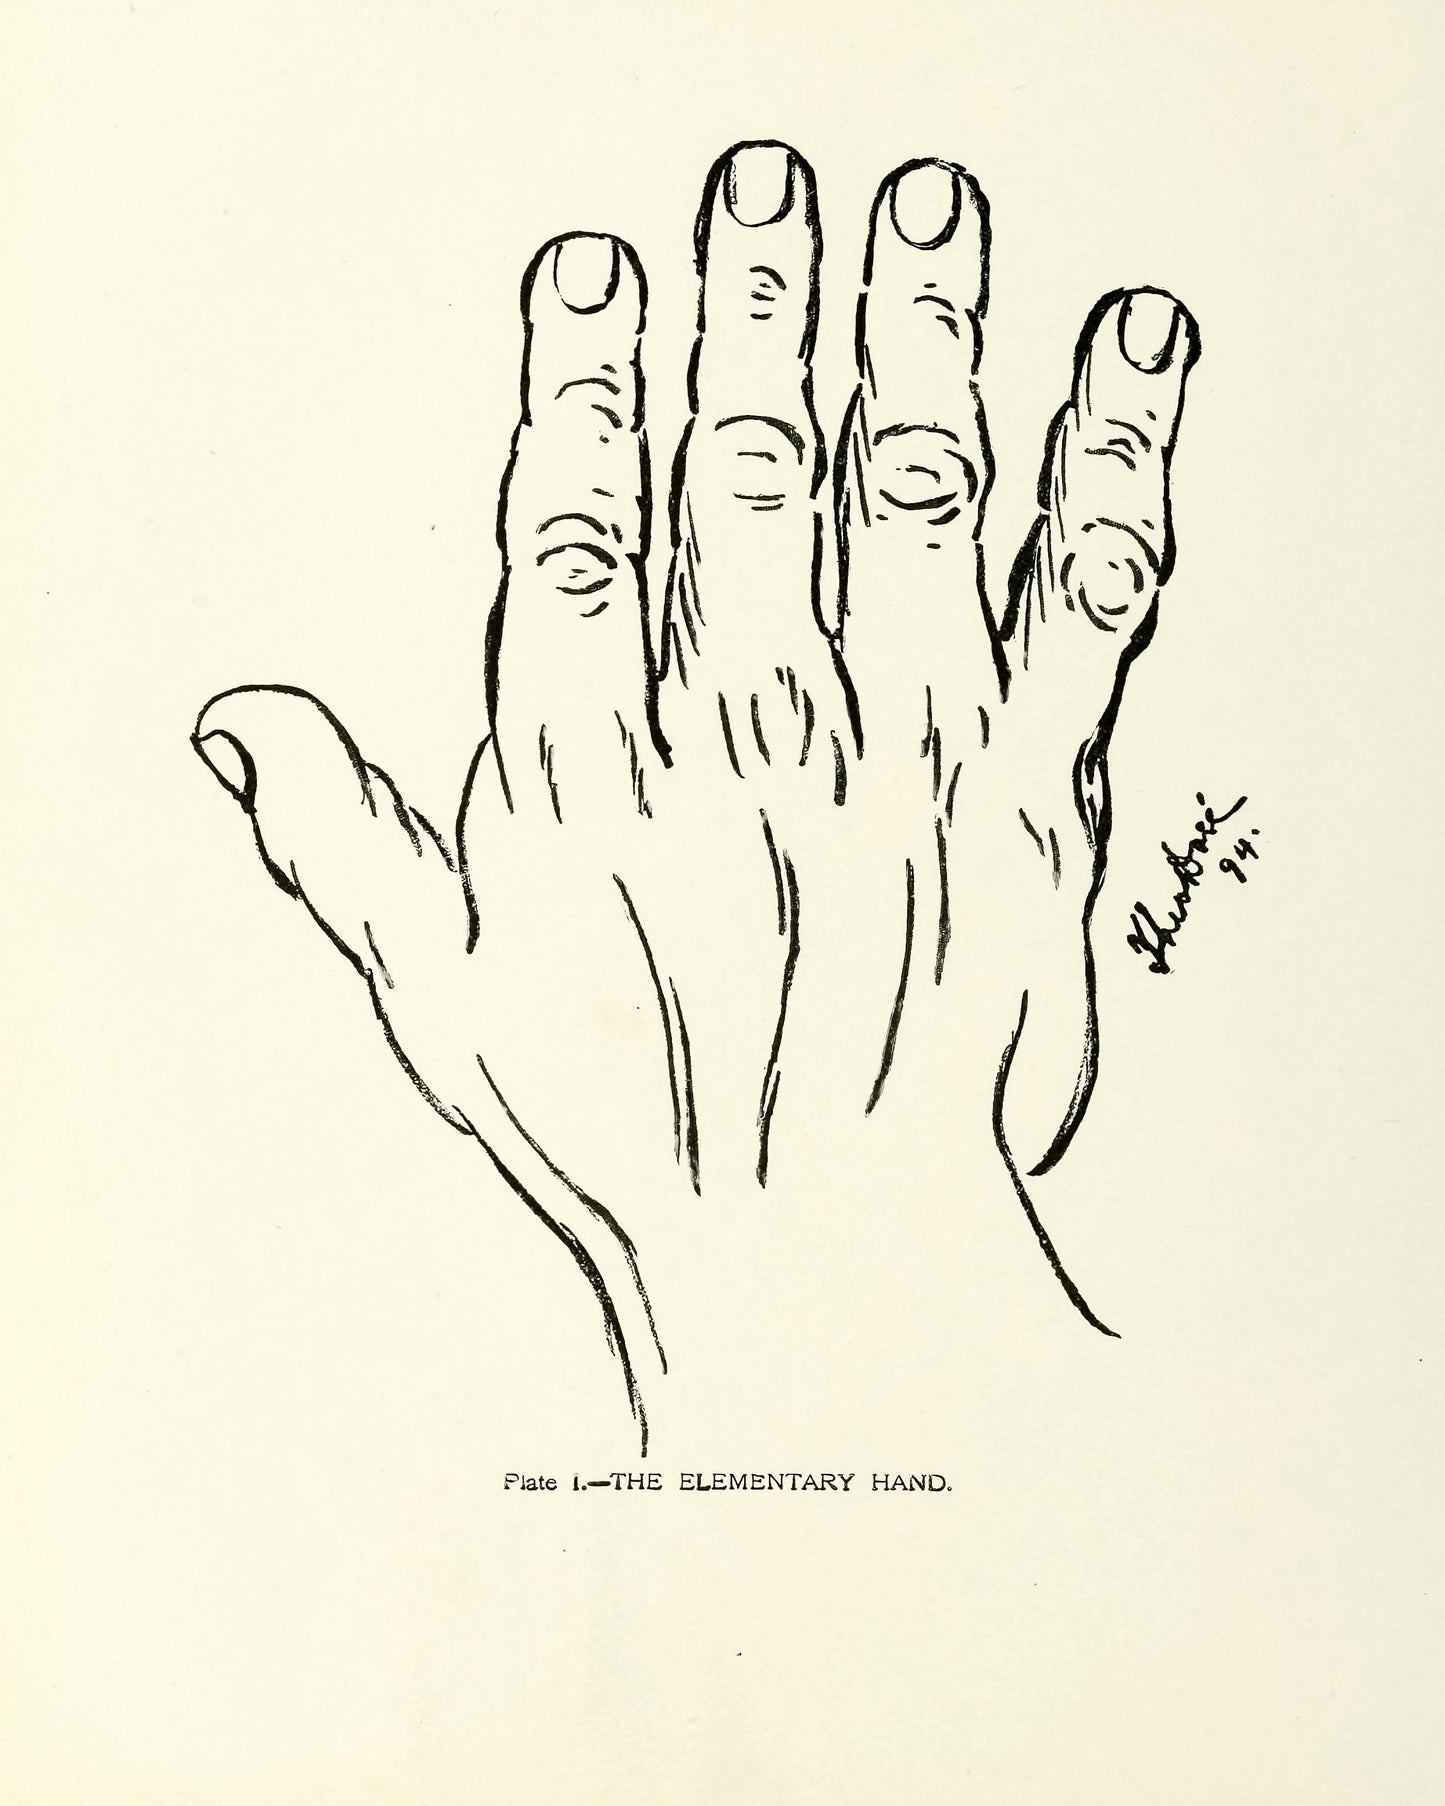 Cheiro's Language of the Hand [52 Images]